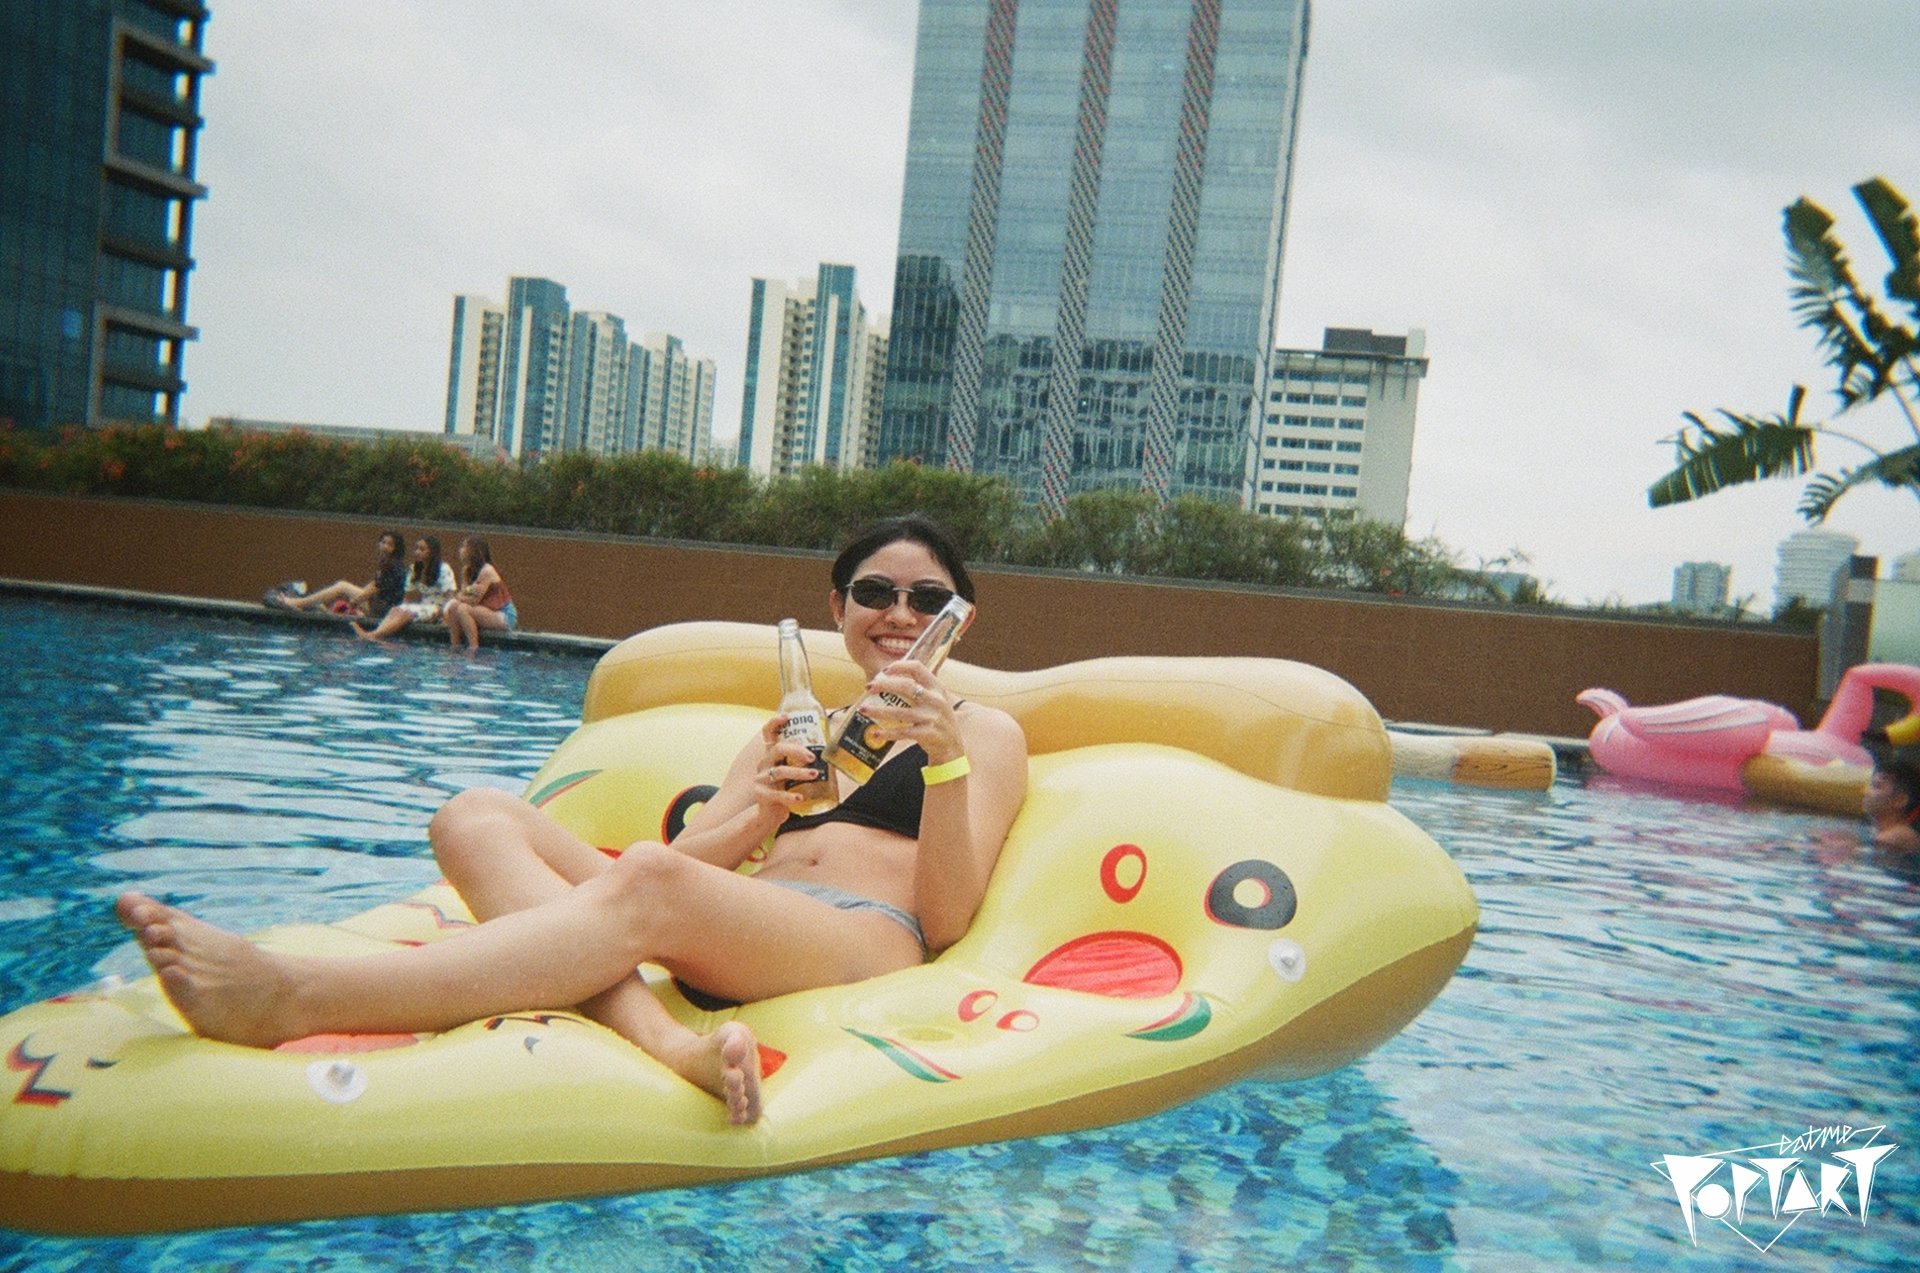  “Wish I snapped the BTS of her trying to get off this floatie without spilling beer or getting her hair wet” 